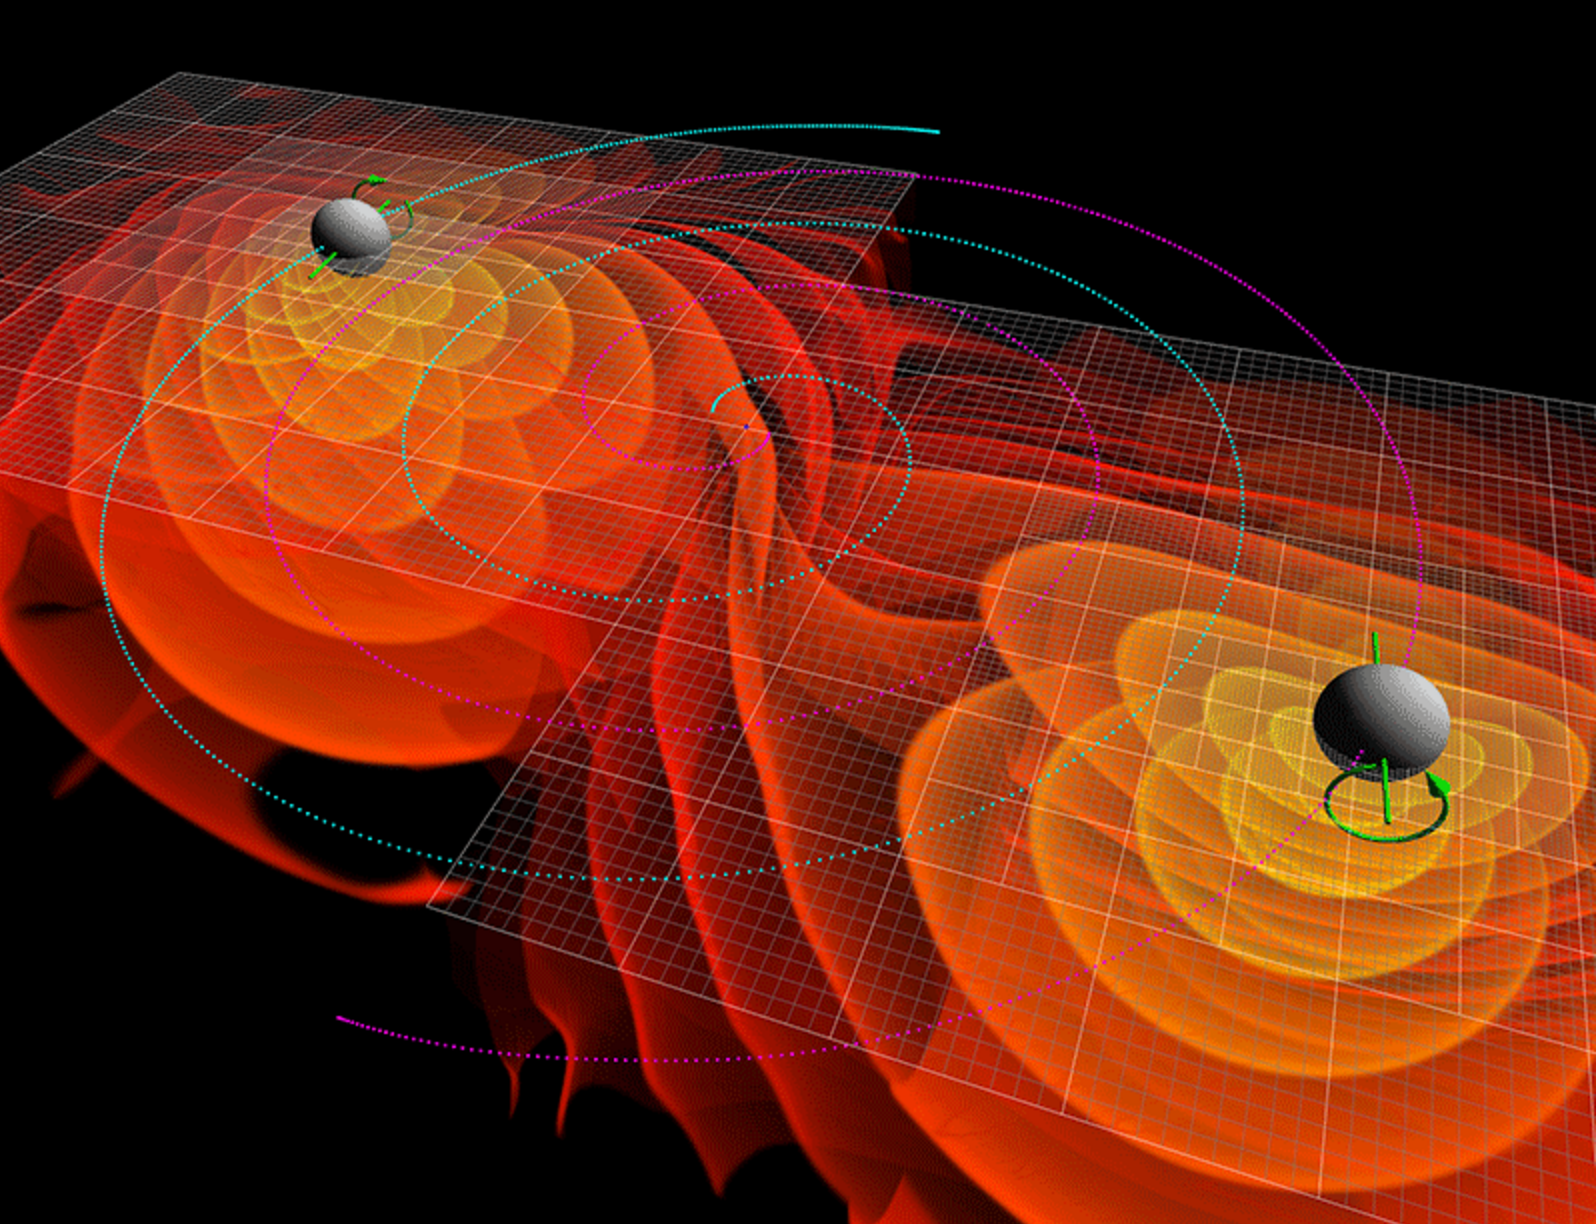 Numerical simulations of the gravitational waves emitted by the inspiral and merger of two black holes